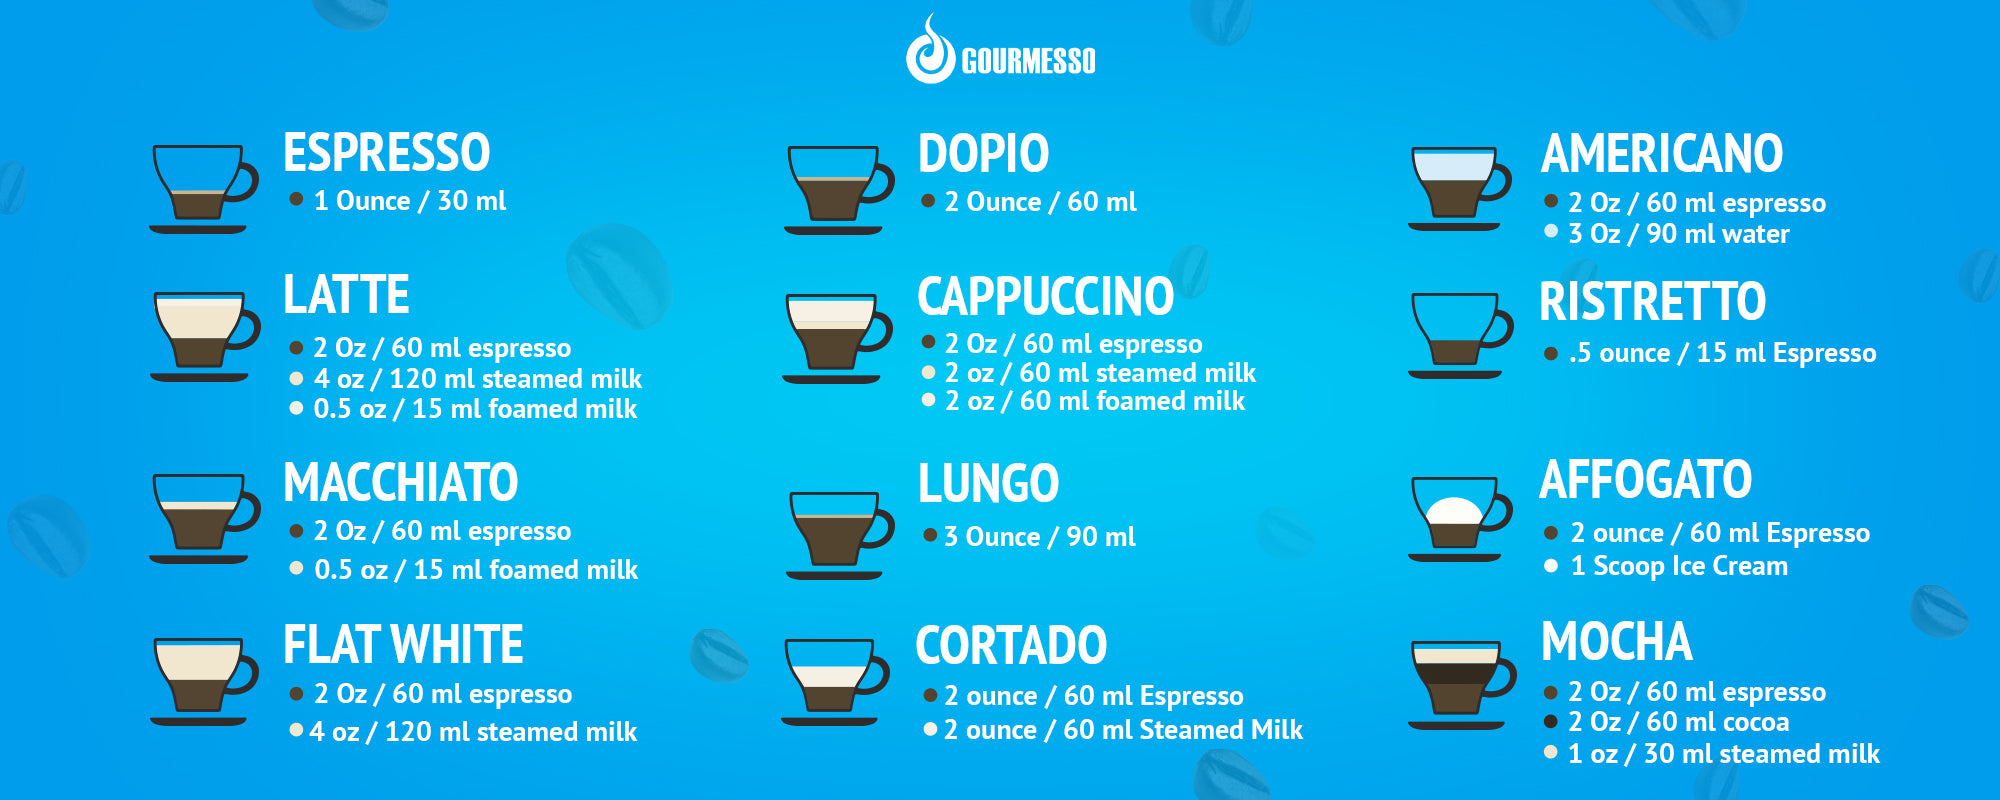 barst Isoleren Stevig Gourmesso's Guide to Espresso Based Drinks - Gourmesso Coffee